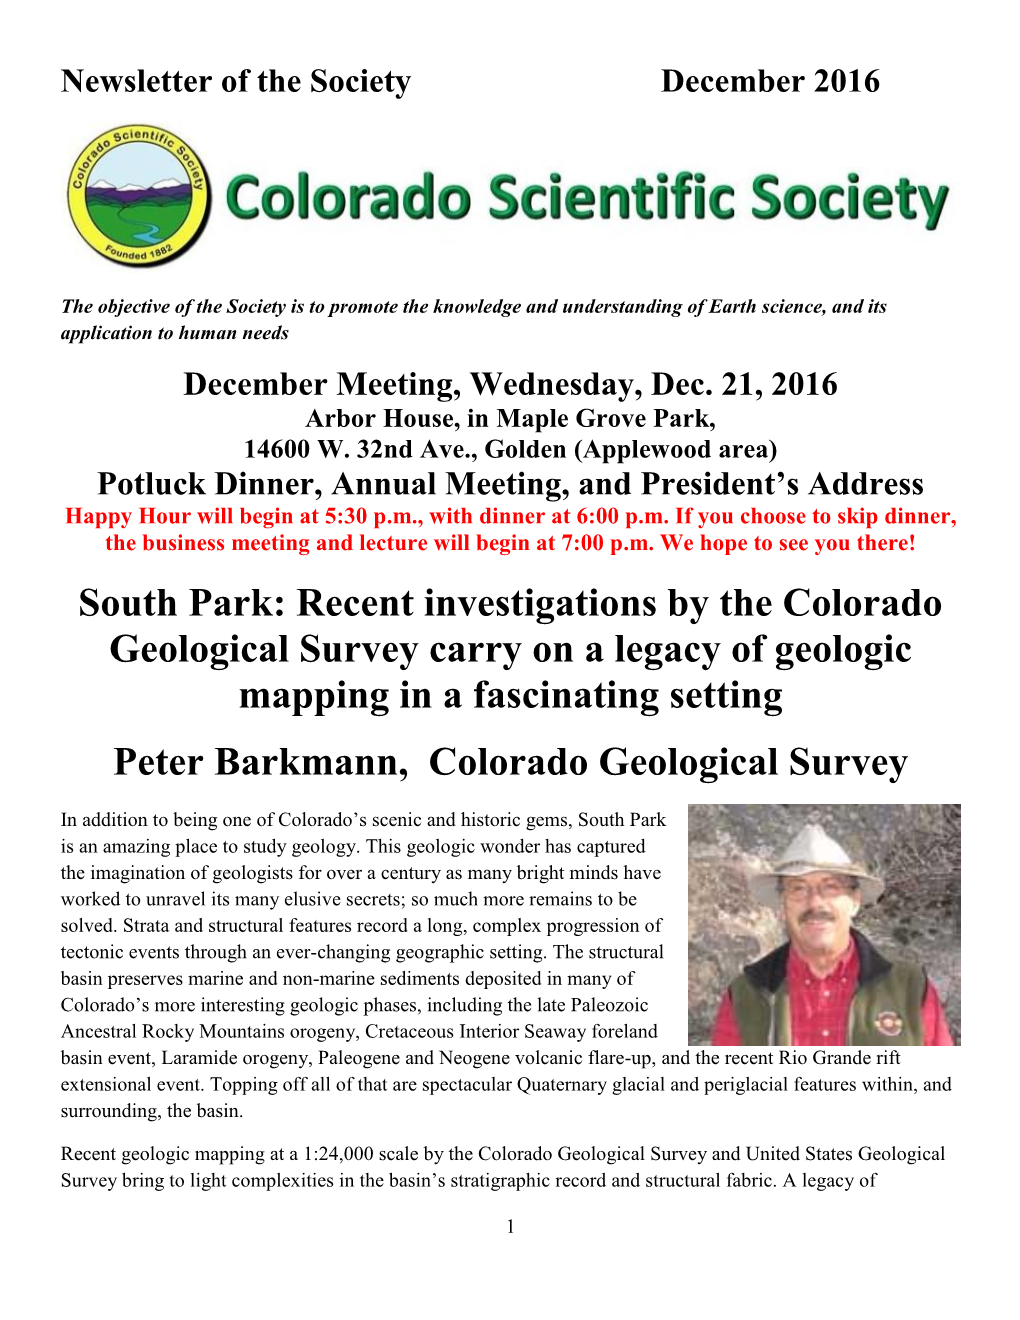 South Park: Recent Investigations by the Colorado Geological Survey Carry on a Legacy of Geologic Mapping in a Fascinating Setting